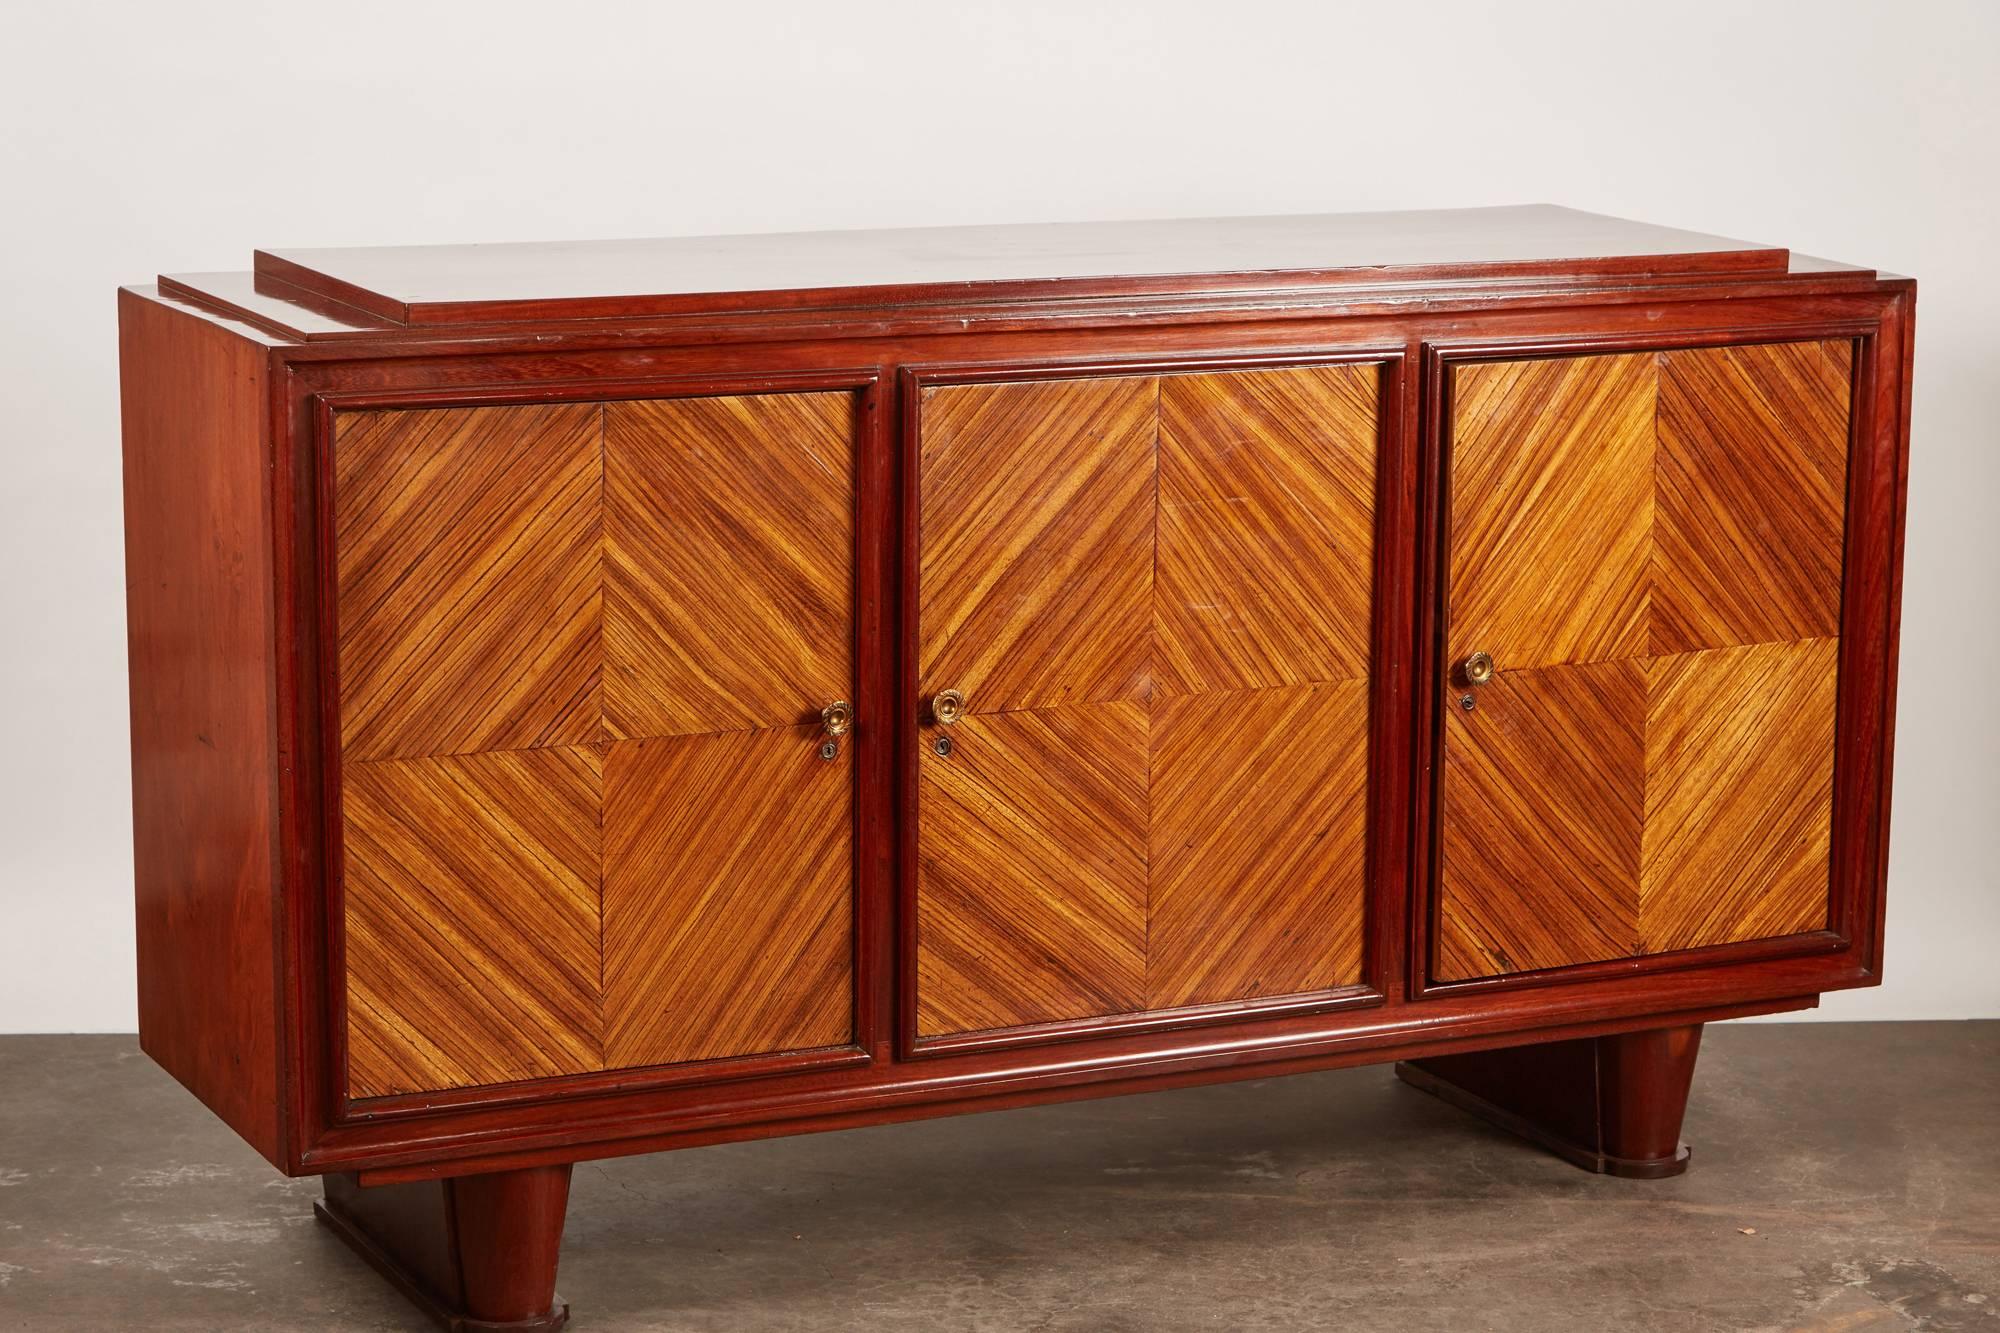 20th century French Colonial Vietnamese Art Deco rosewood sideboard. Three parquetry inlaid doors. The center compartment has a single drawer. Locks and catches are original but pulls are replaced.